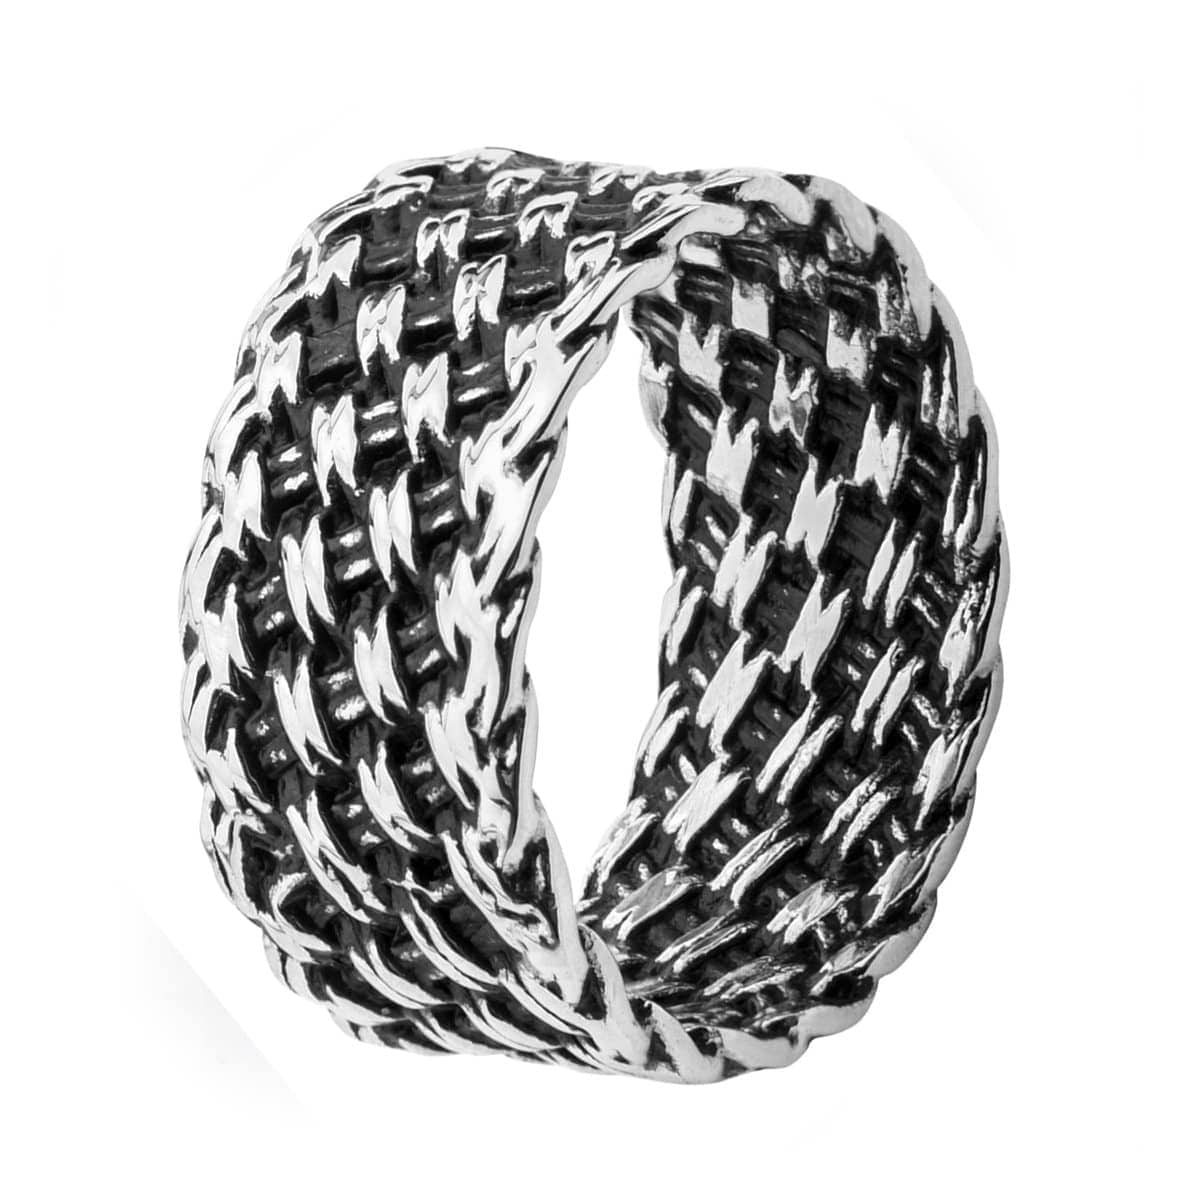 INOX JEWELRY Rings Antiqued Silver Tone Stainless Steel Cross-Weave Woven Pattern Ring